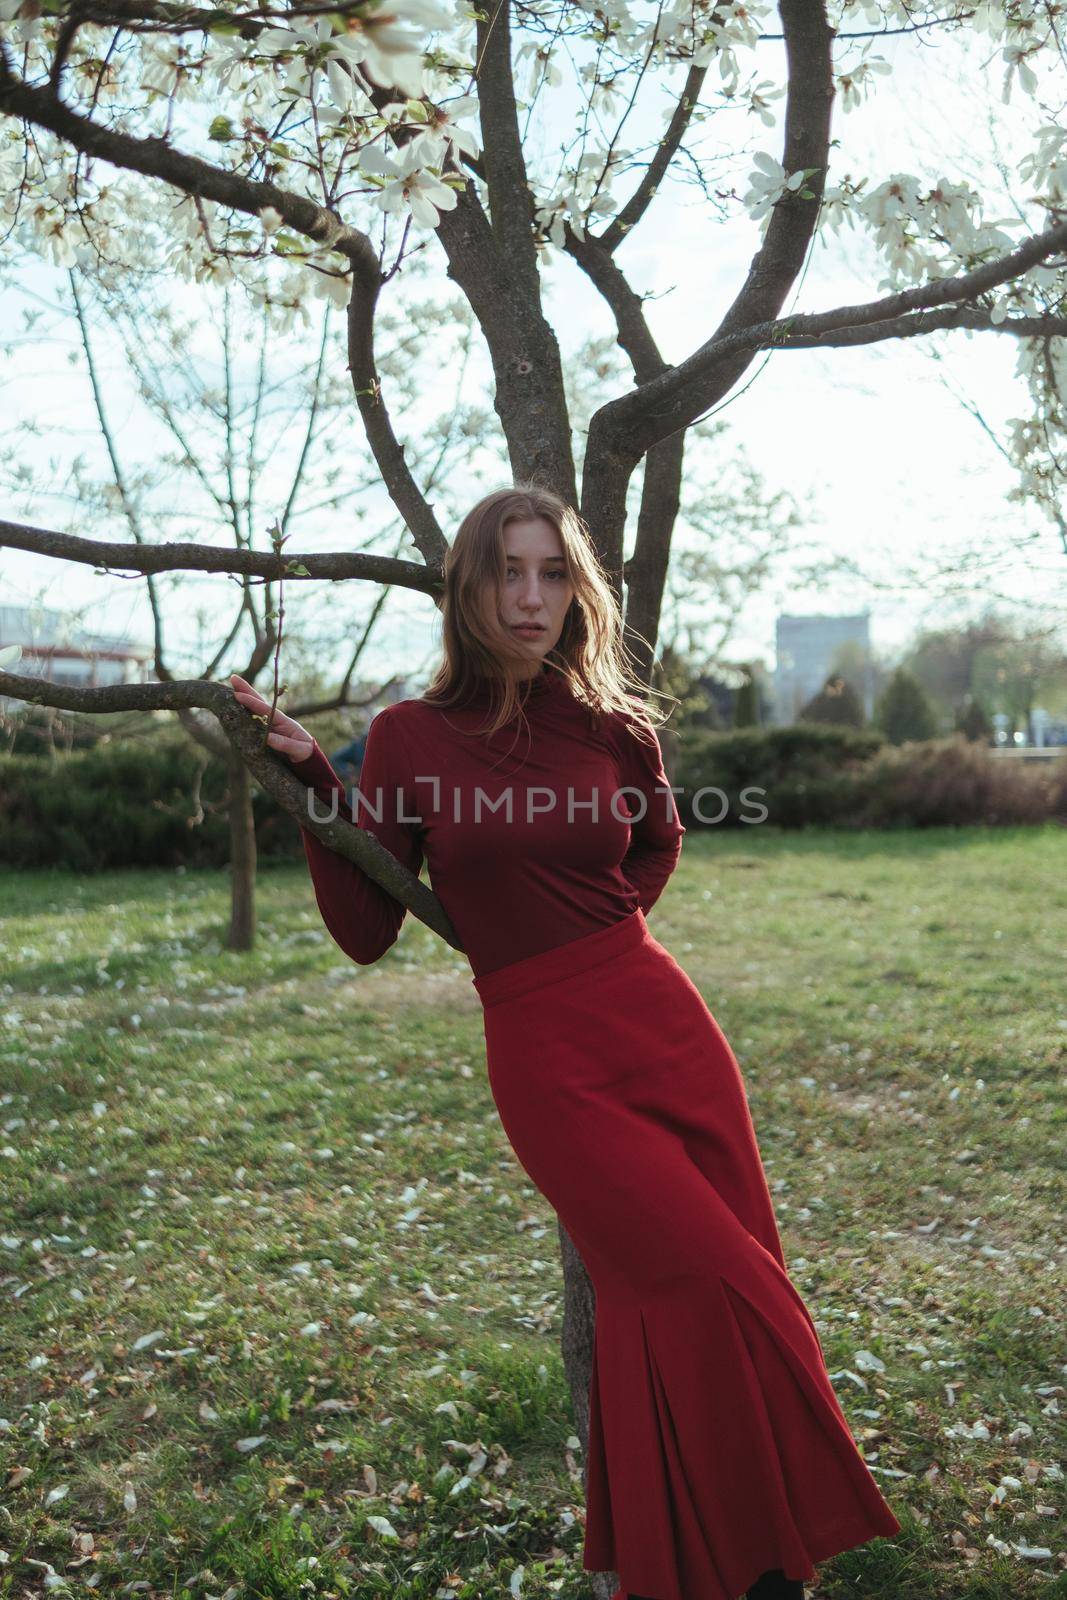 A blonde girl in red leans on a tree in the park. the concept of unity with nature